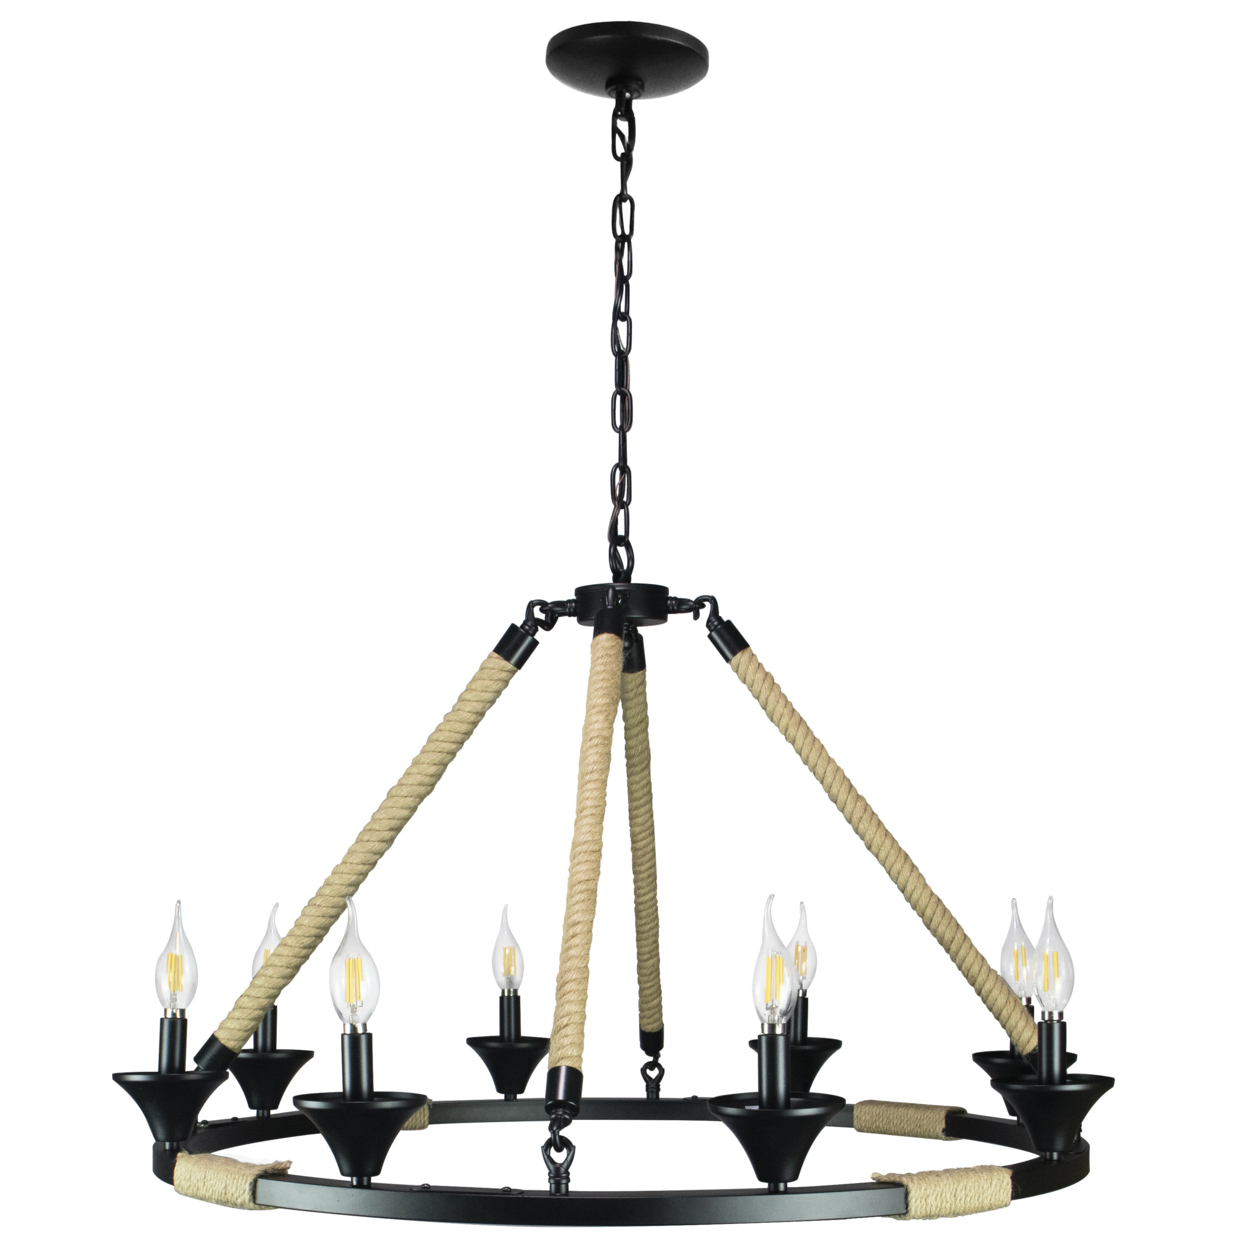 Hinnes Gothic Wagon Wheel Light Fixture with 8 Bulb Overhead Lighting and Vintage Rope Decor for Home, Living or Dining Room, Foyer